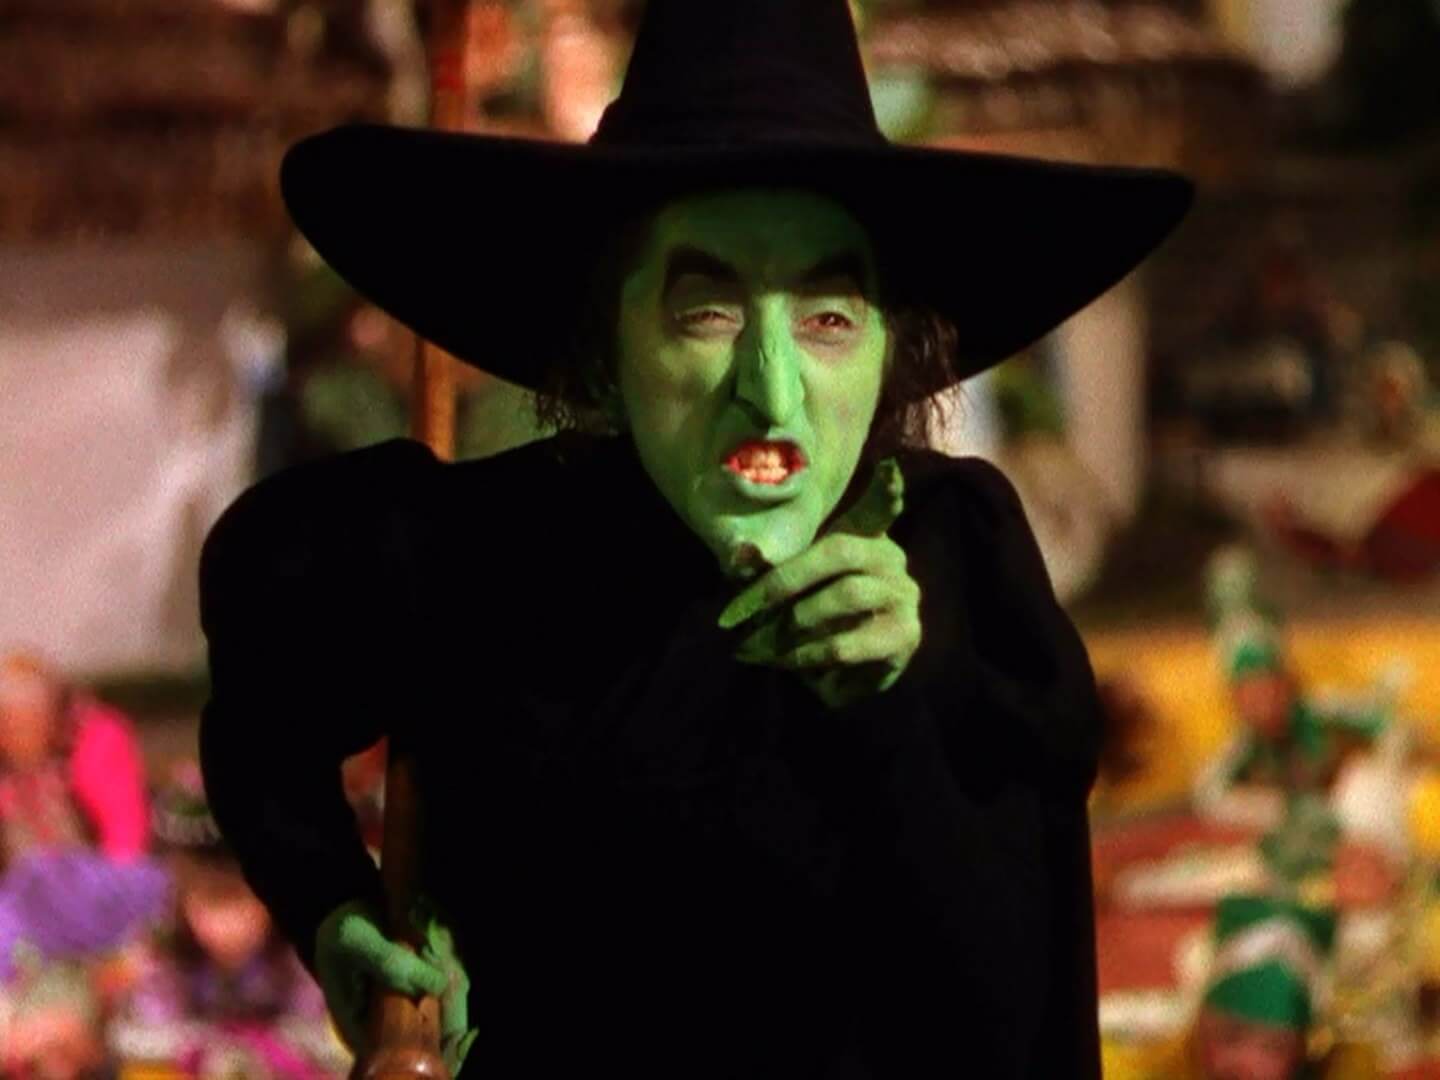 How to Make a YouTube Channel - Wicked Witch of the East